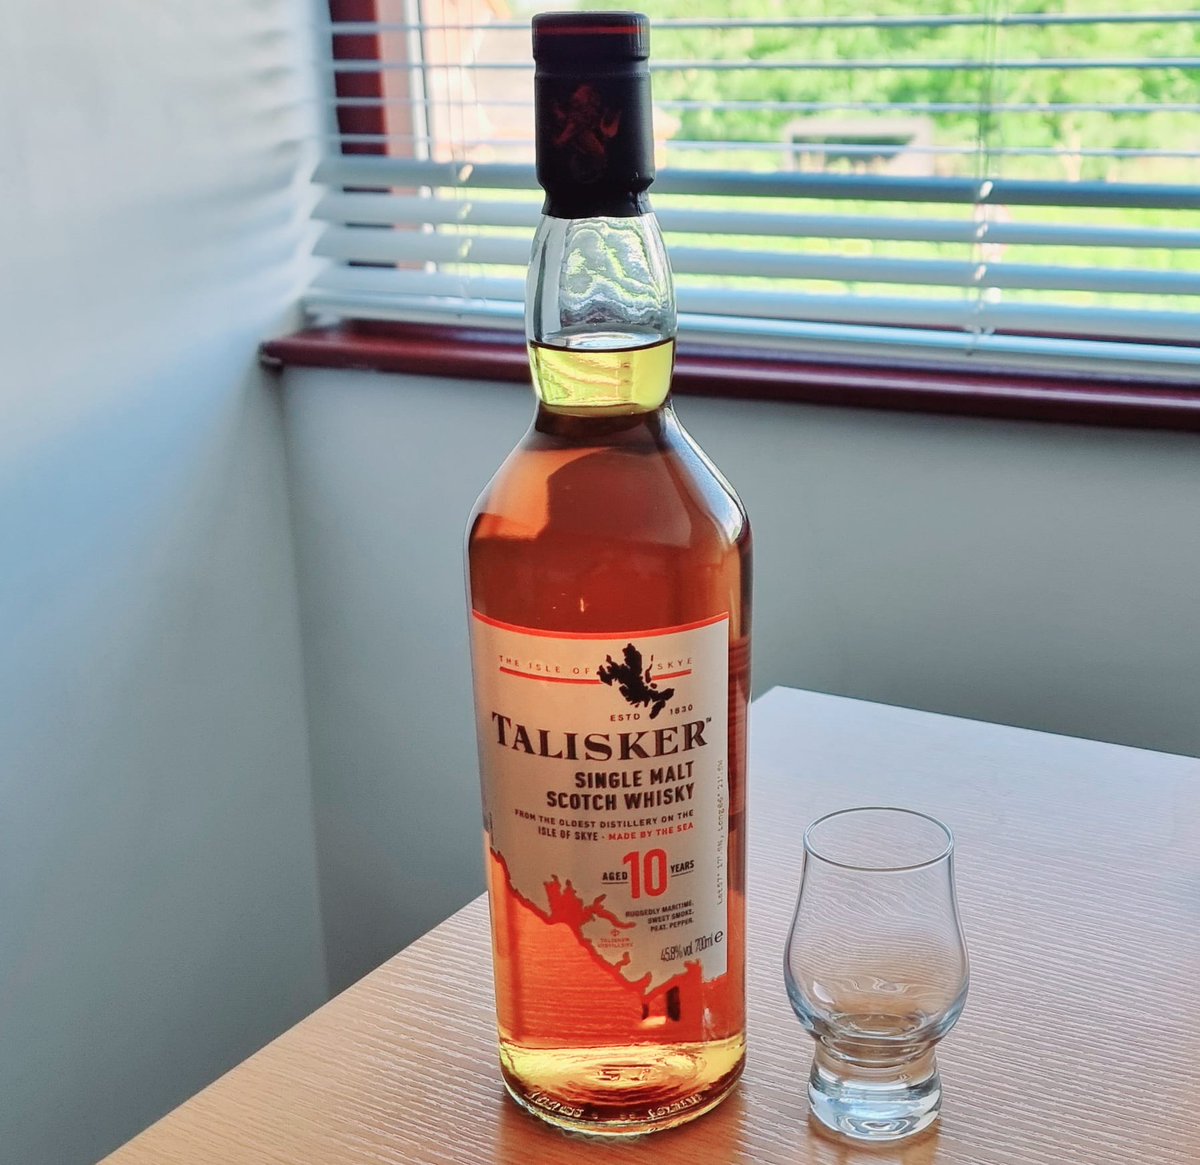 Good news today, I have a new bottle and its full 😀

Talisker #whisky, 10 year old.